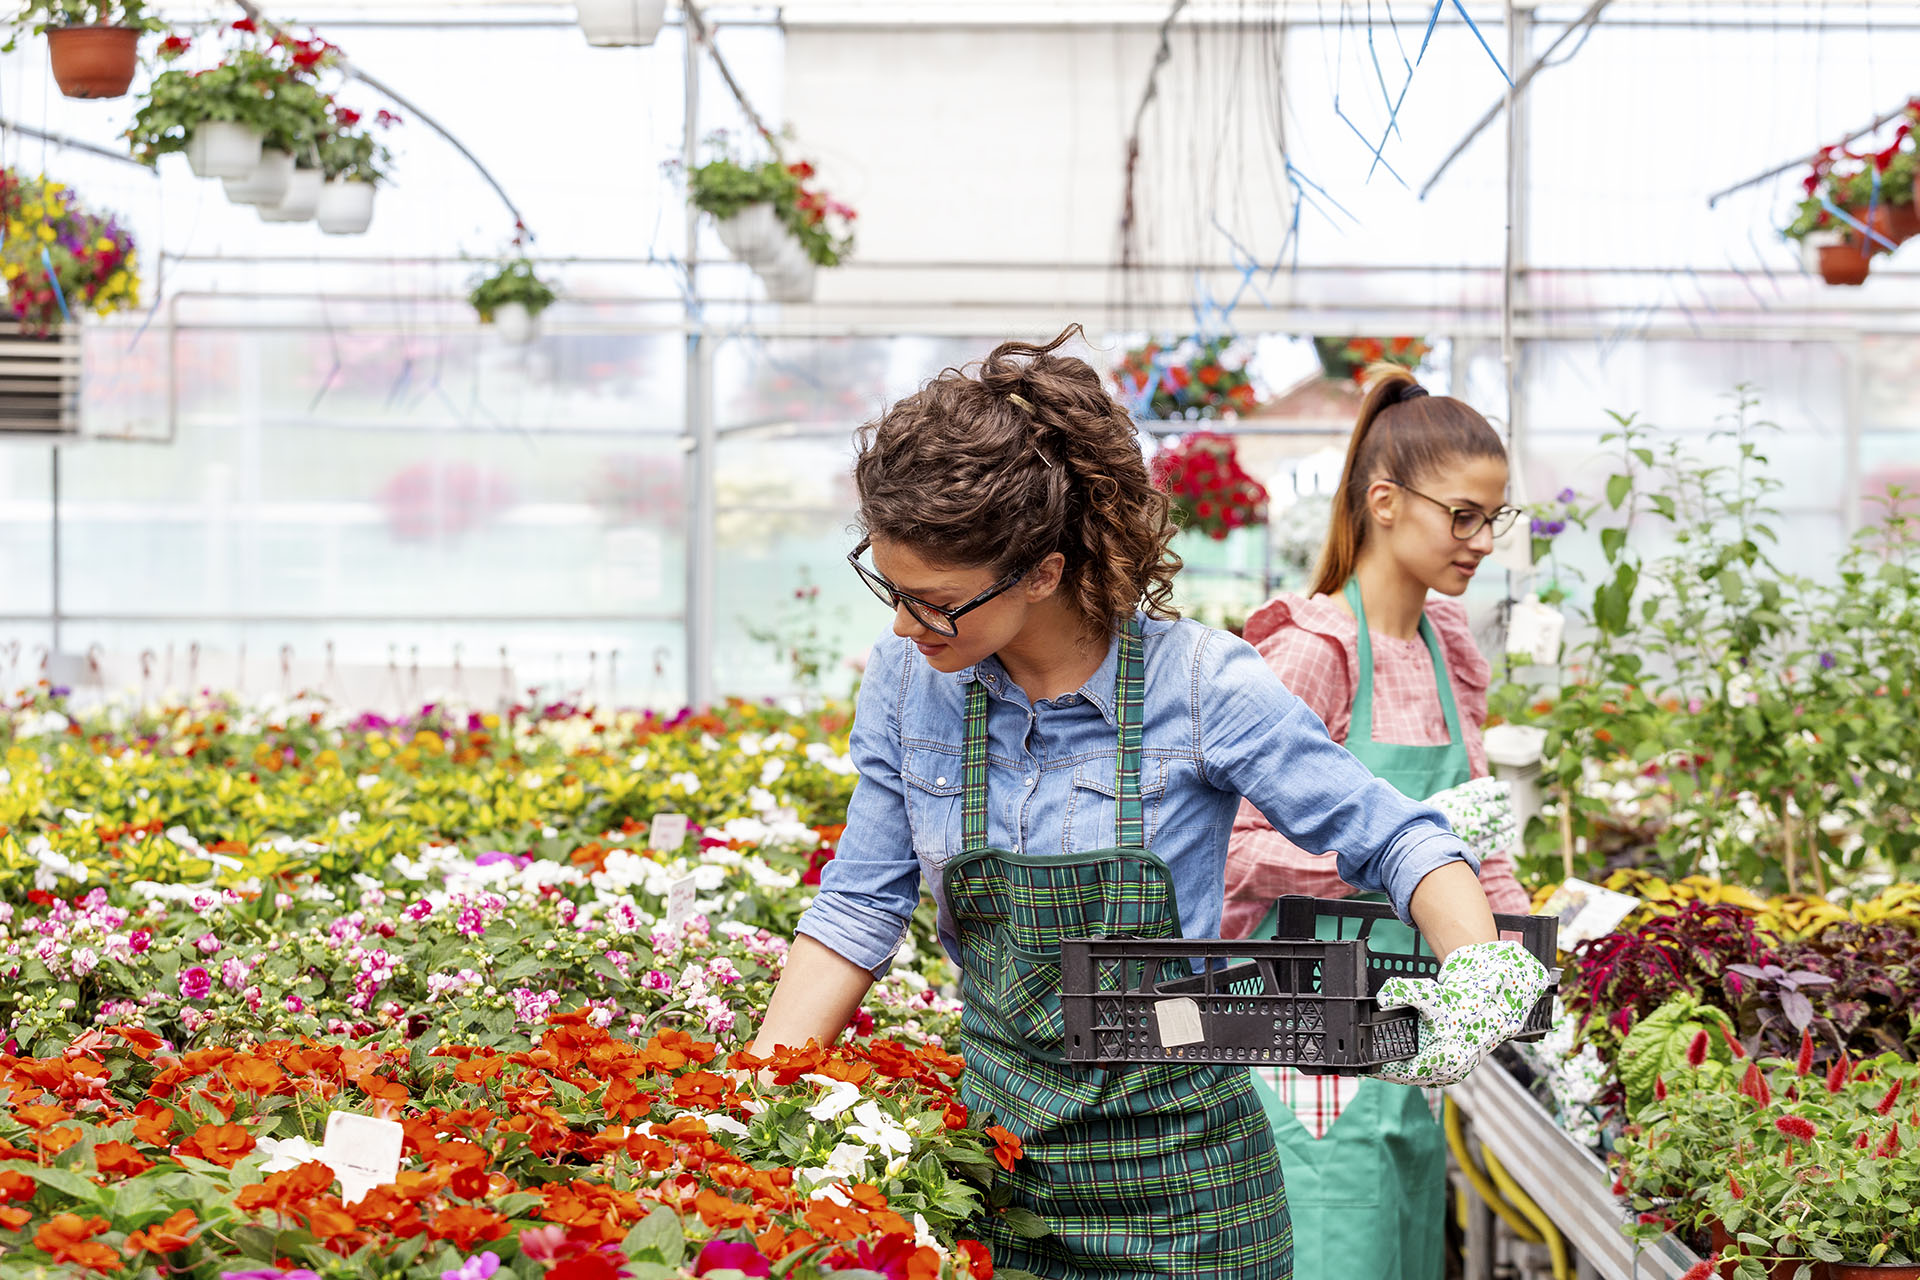 Unique Harvest RFID Software Upscales and Simplifies Plant Tracking and Tracing for the Horticulture Industry